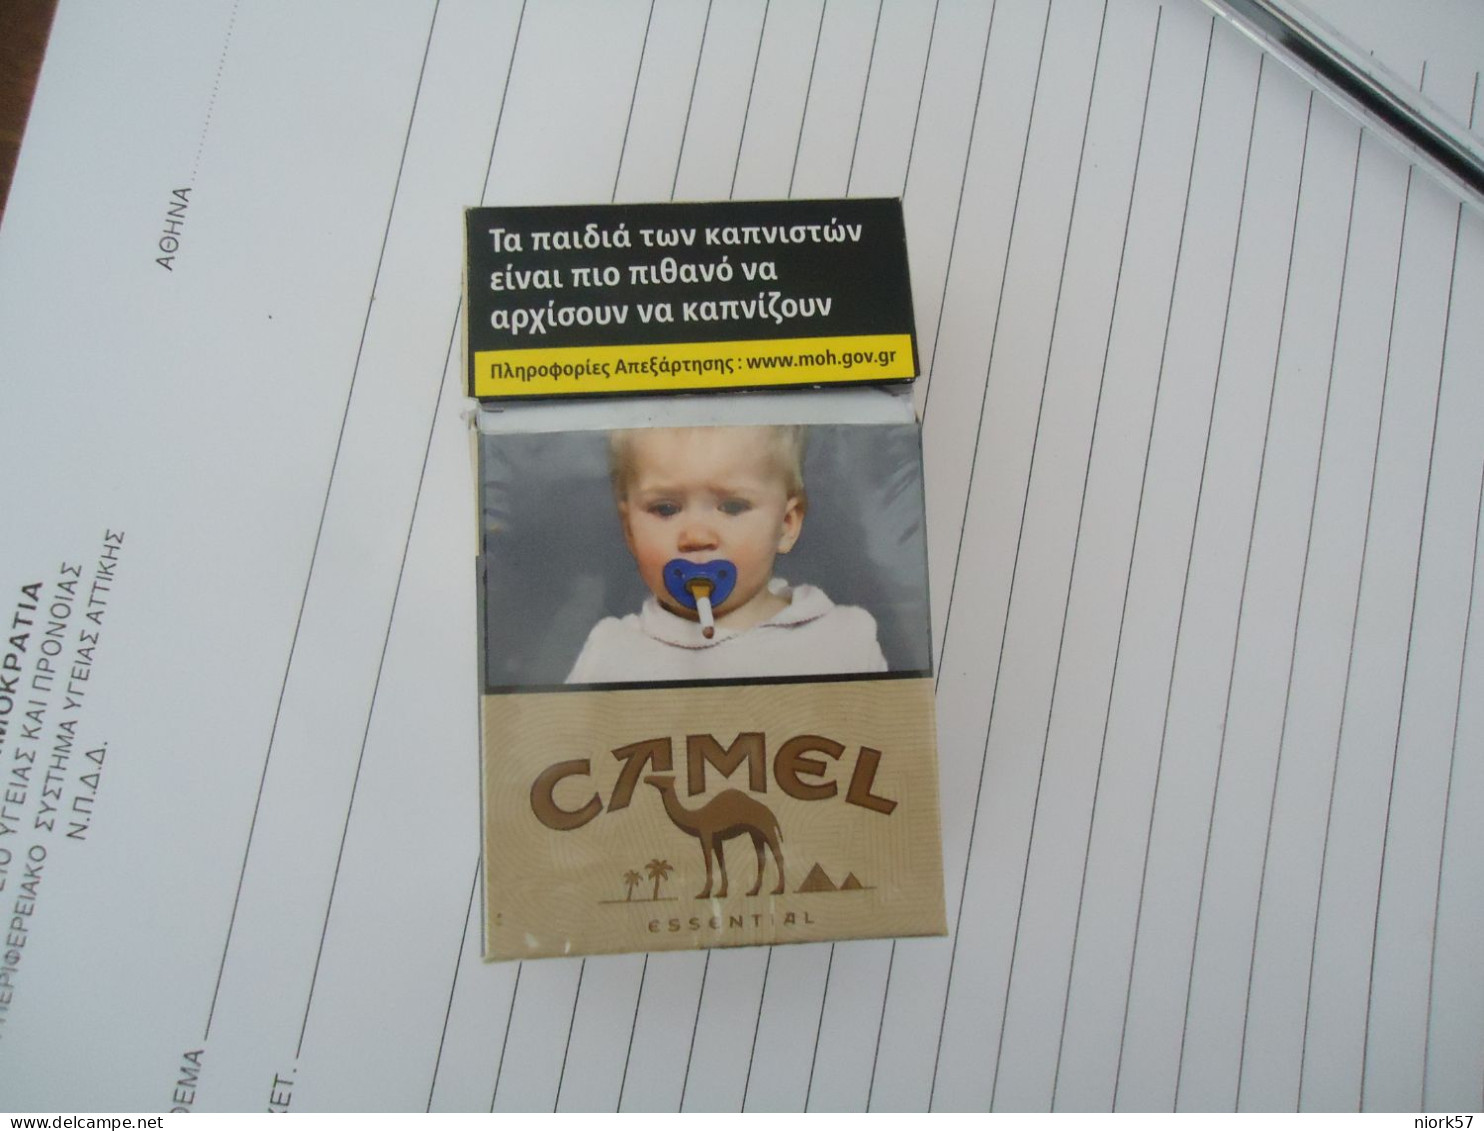 GREECE USED EMPTY CIGARETTES BOXES CAMEL LIGHTS - Empty Tobacco Boxes